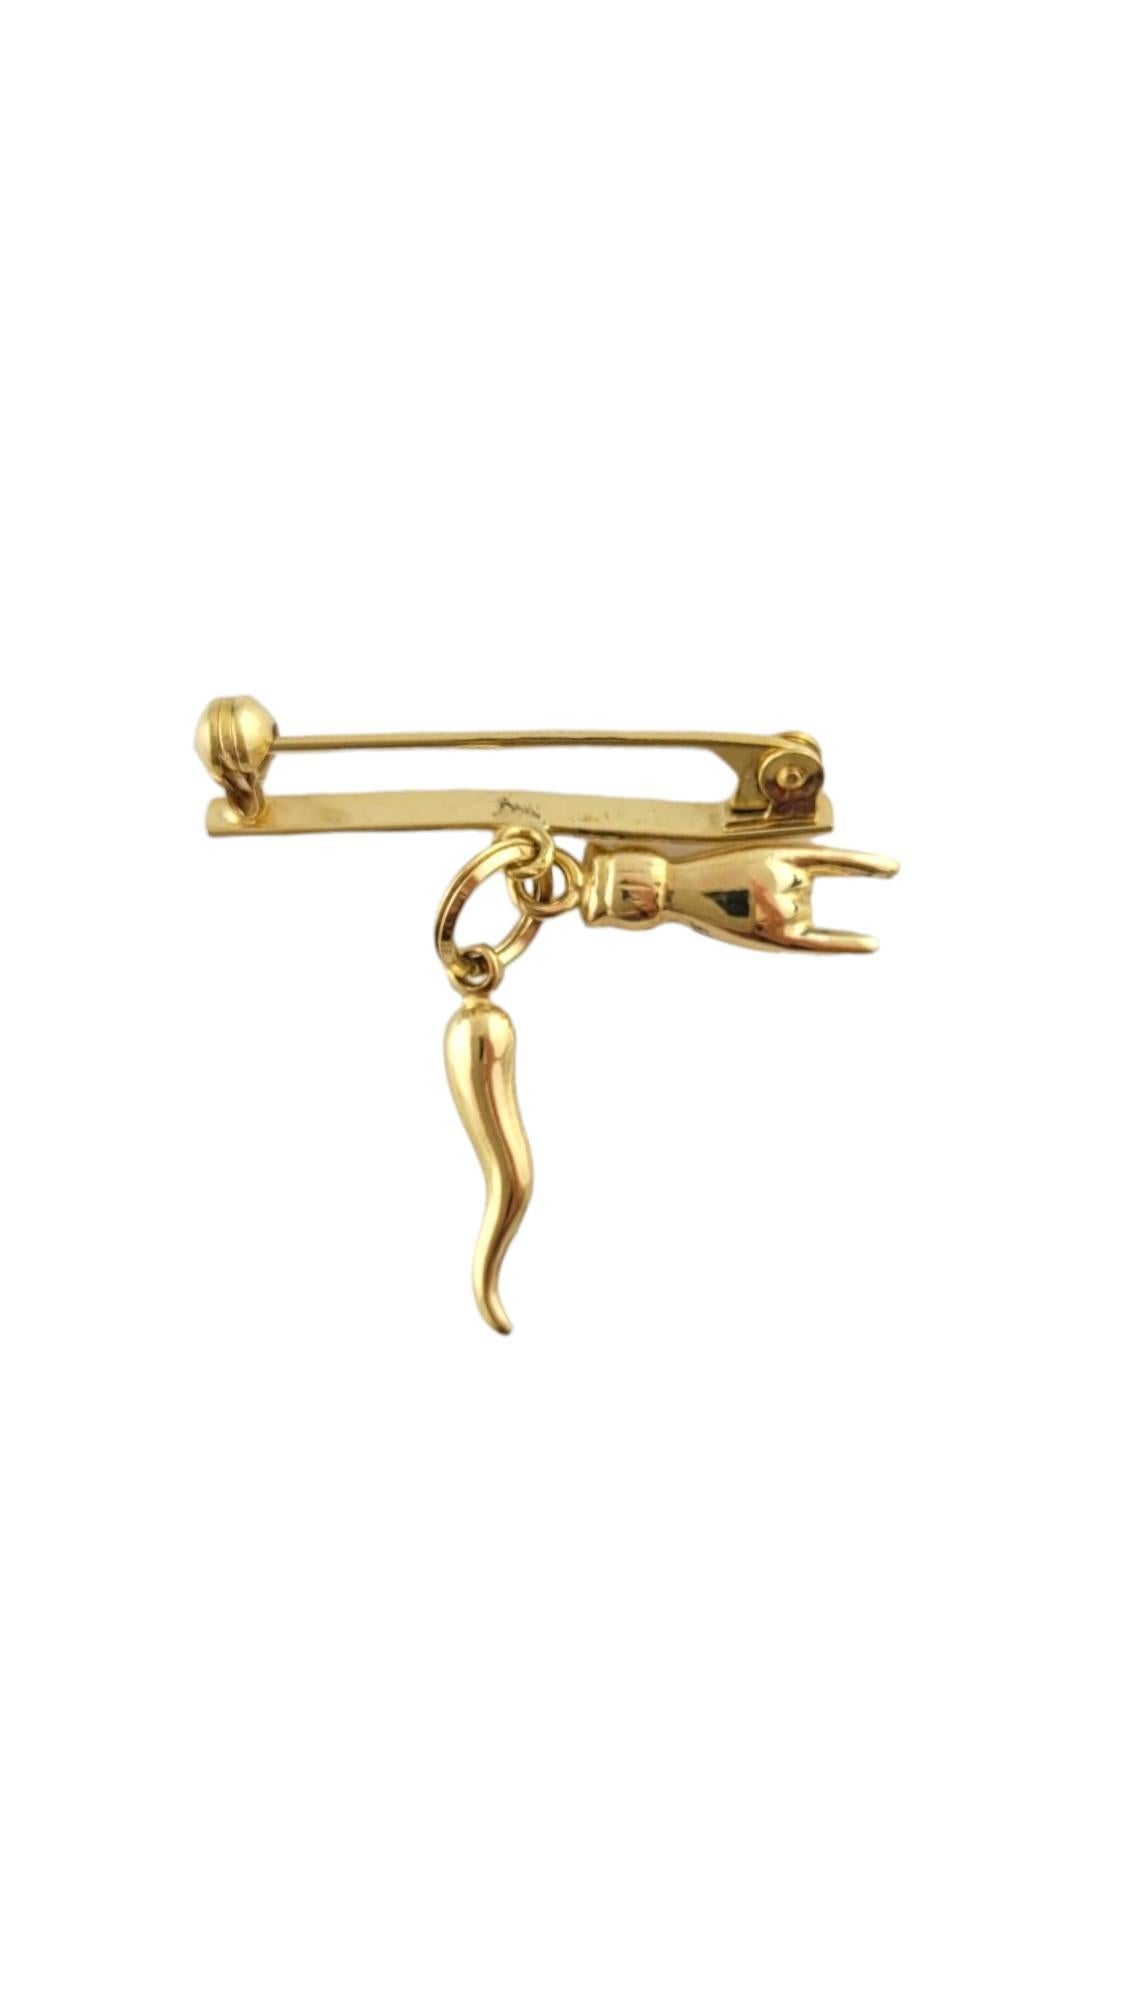 18K Yellow Gold Baby Italian Horn & Hand Pin #16782 For Sale 2